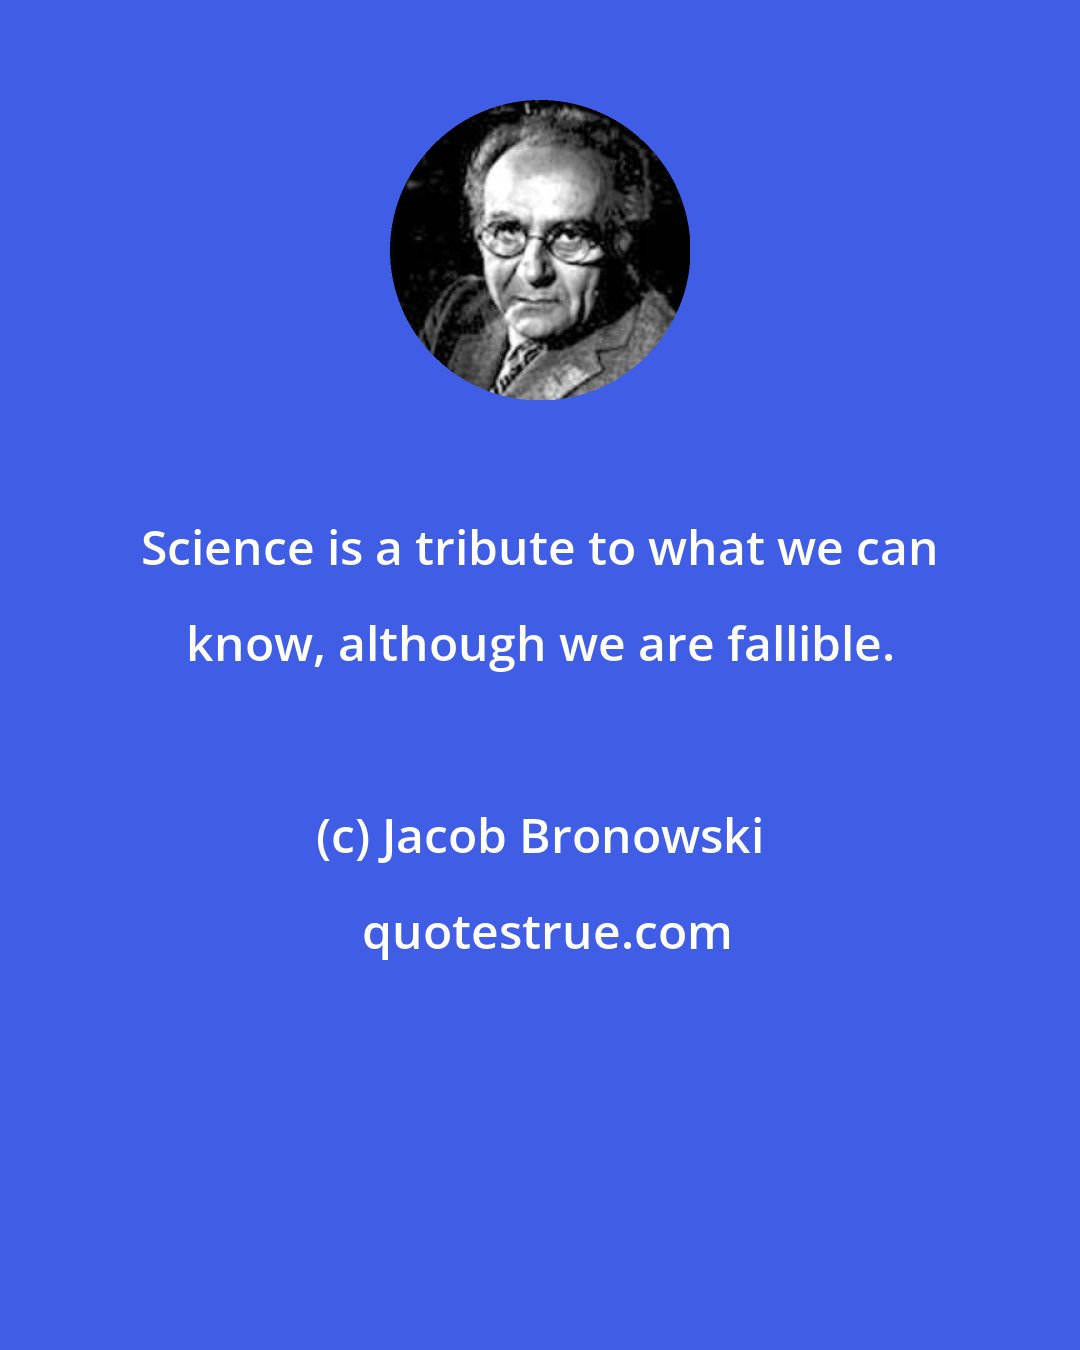 Jacob Bronowski: Science is a tribute to what we can know, although we are fallible.